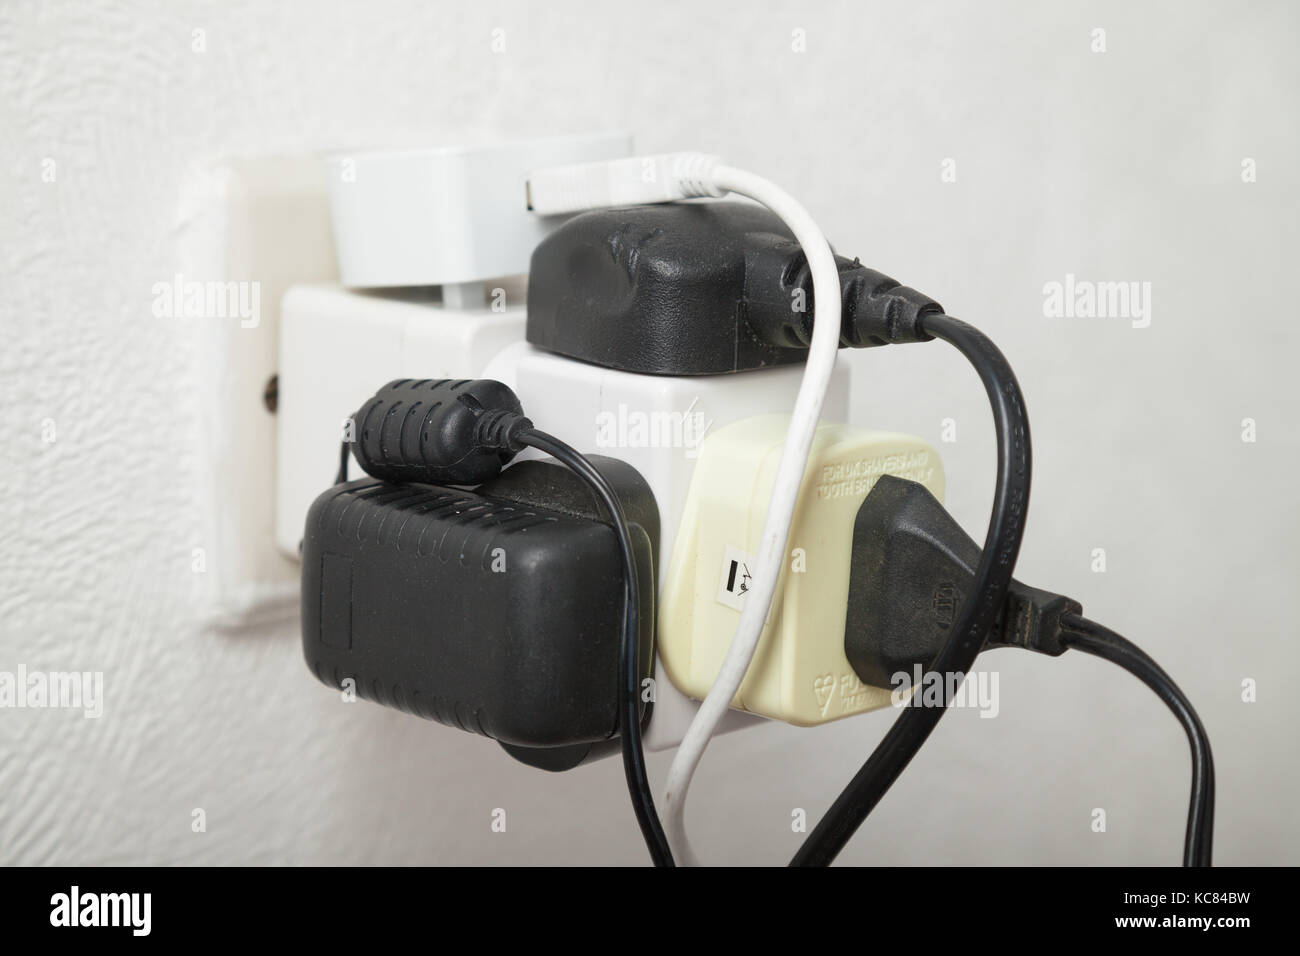 Close up of a overloaded household electrical socket. Stock Photo